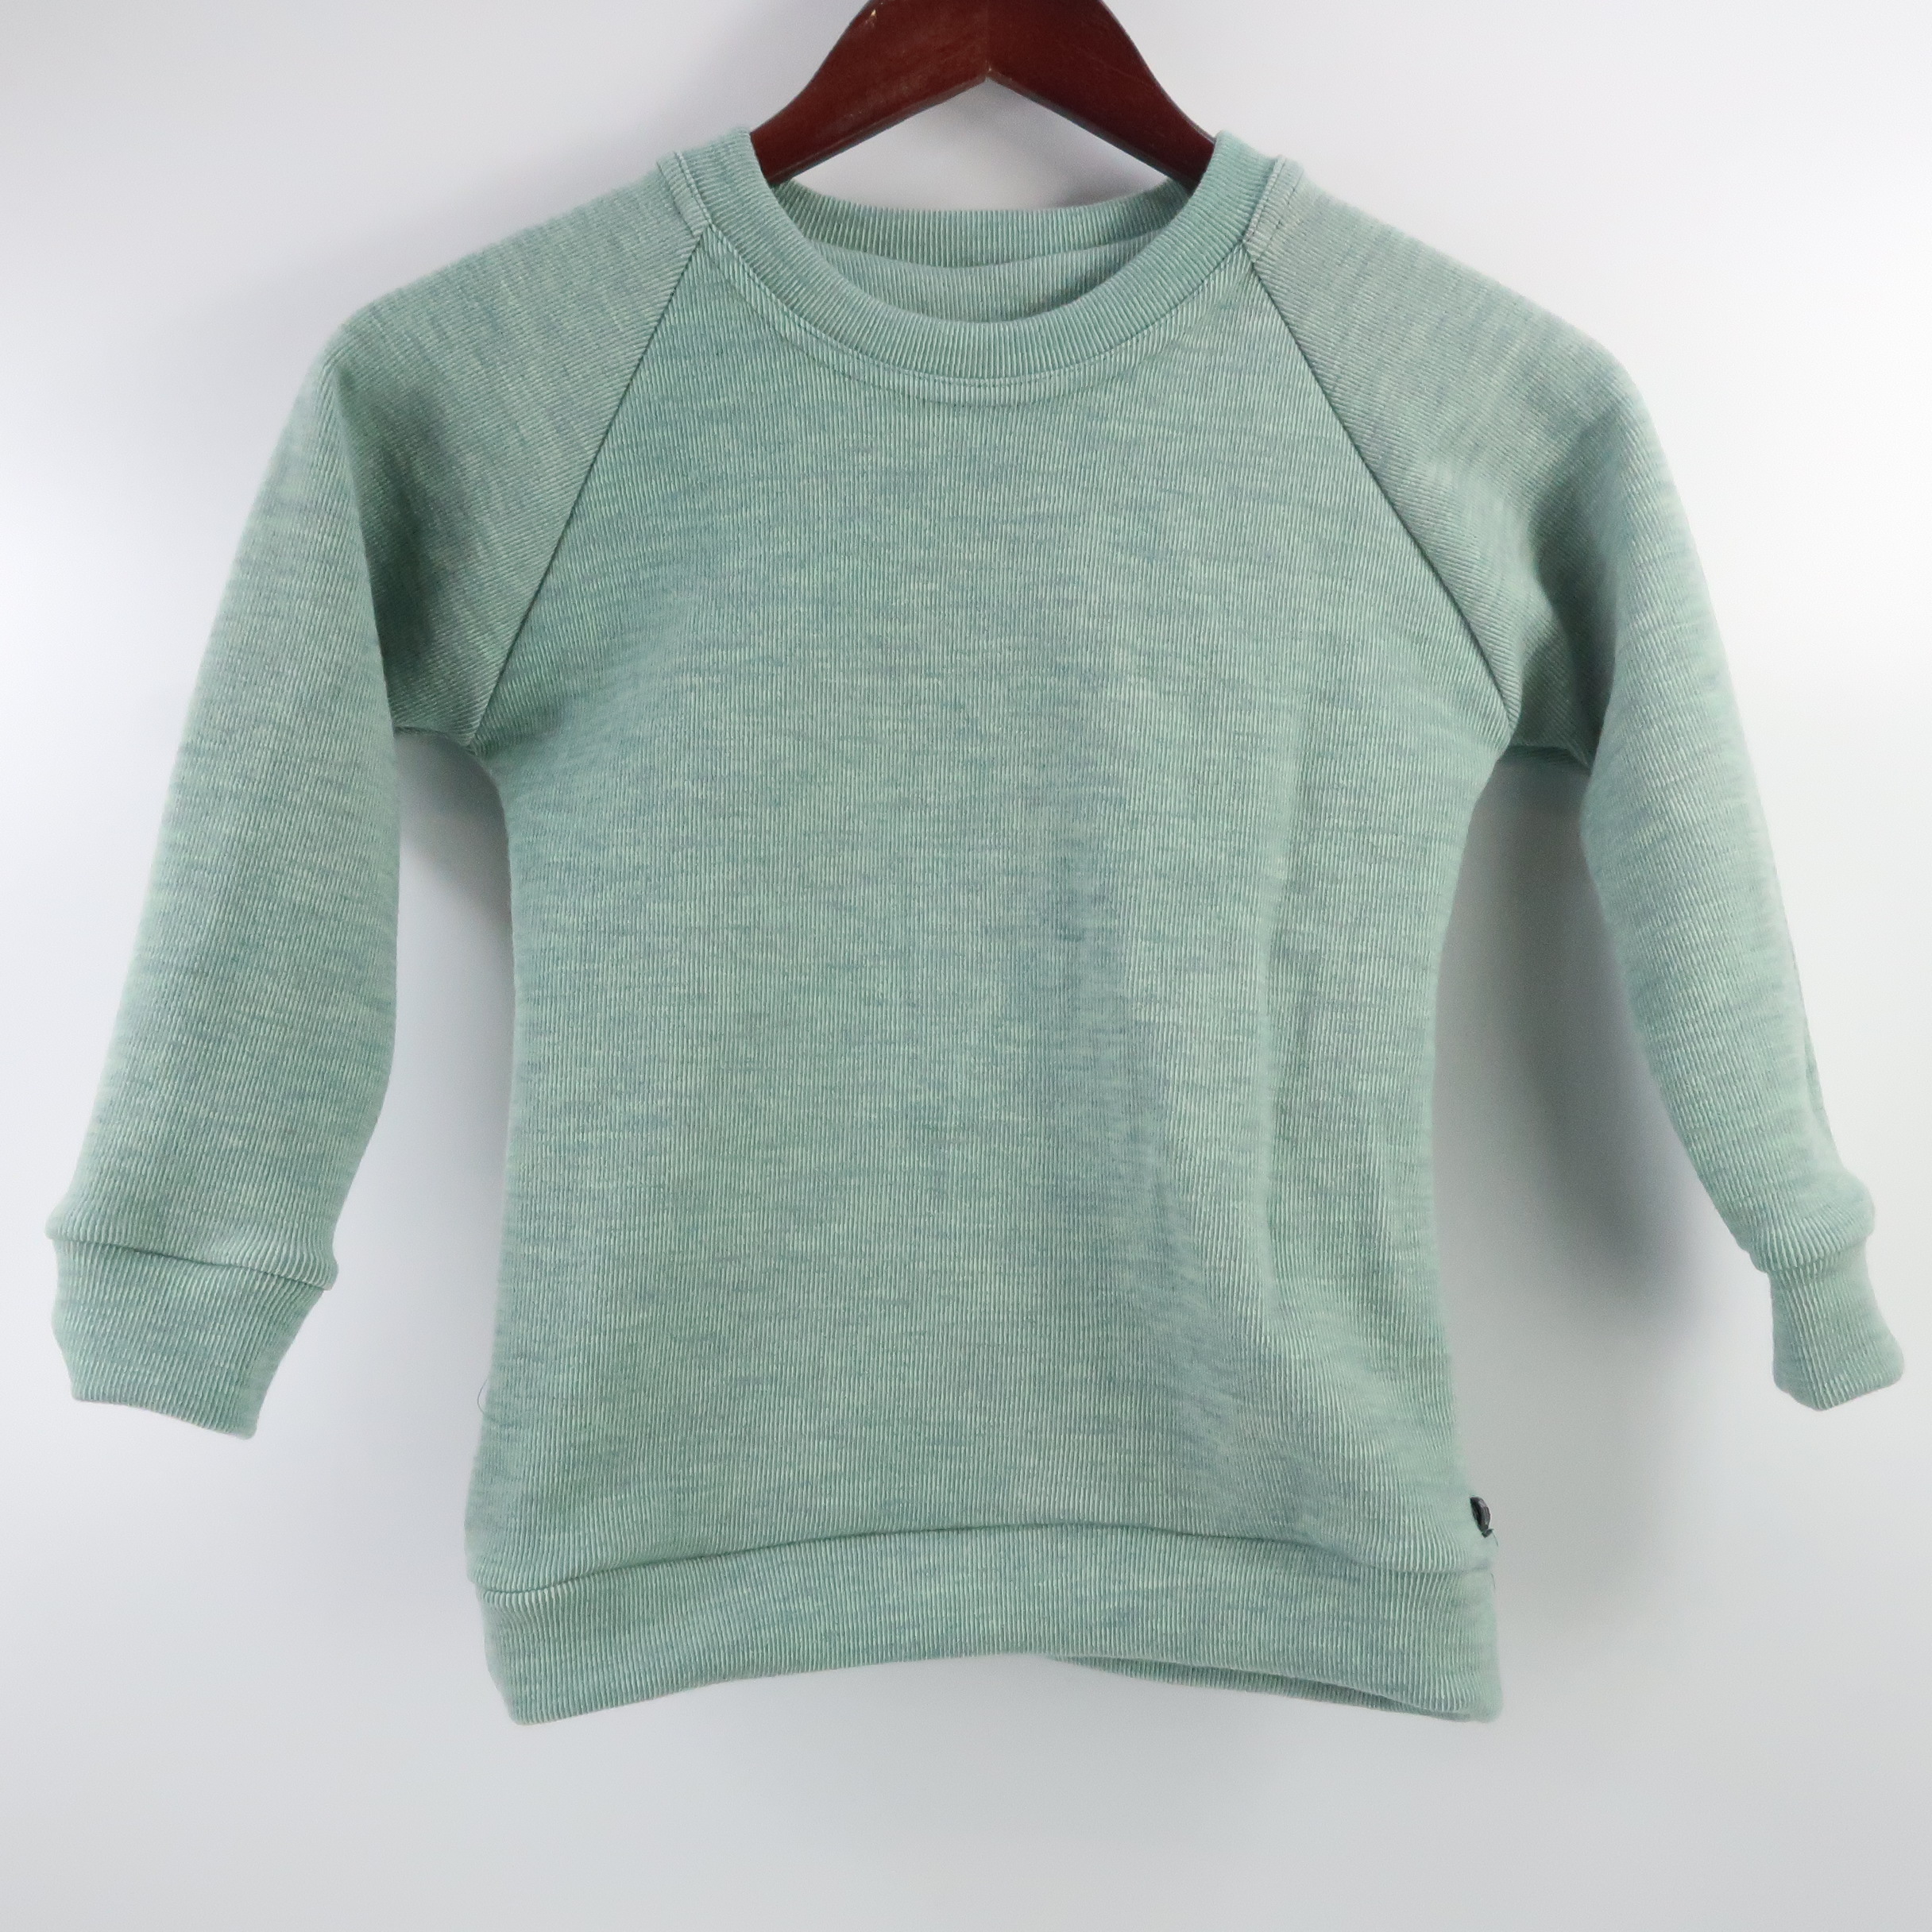 Merino Wool Simple Crew Neck Sweater. With cuffed raglan sleeves and a classic rounded crew neck. This sweater is a striped light green colour.